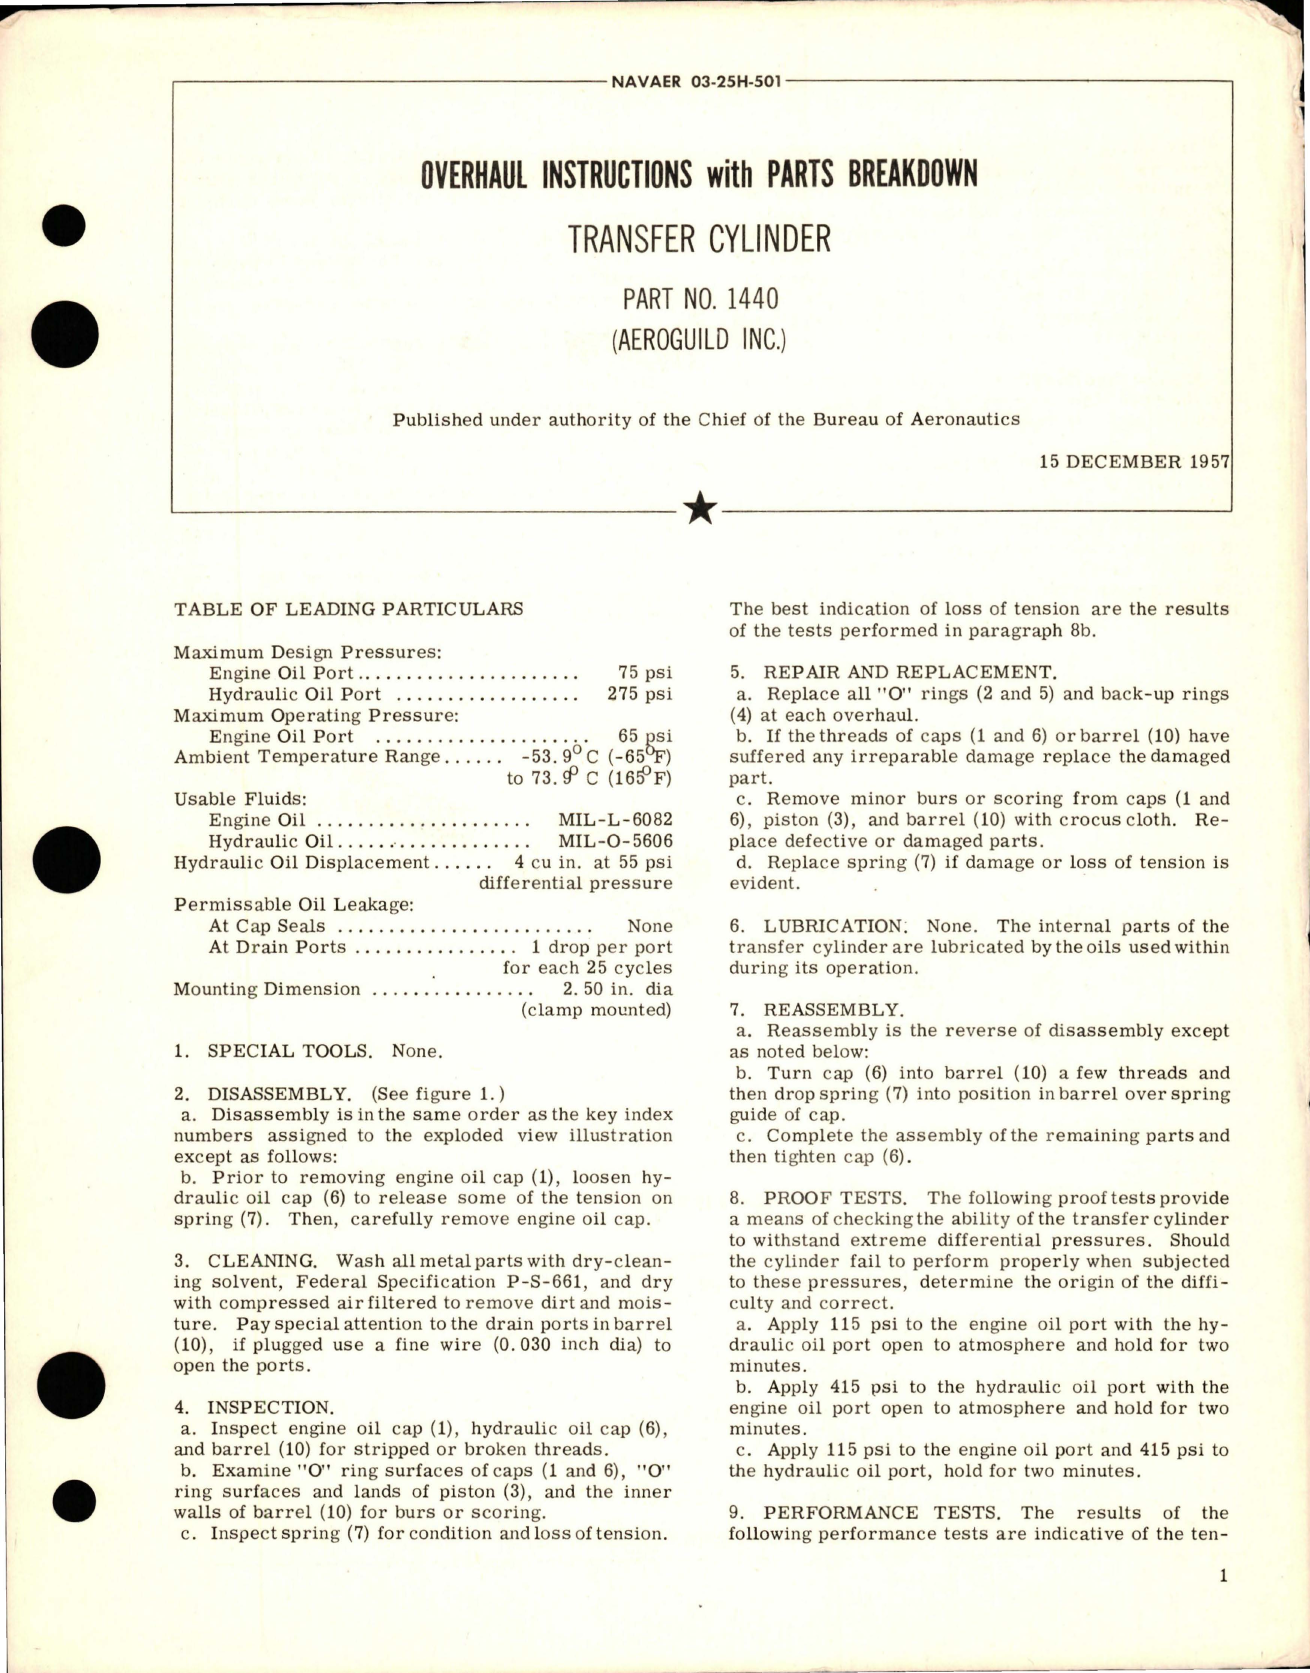 Sample page 1 from AirCorps Library document: Overhaul Instructions with Parts Breakdown for Transfer Cylinder - Part 1440